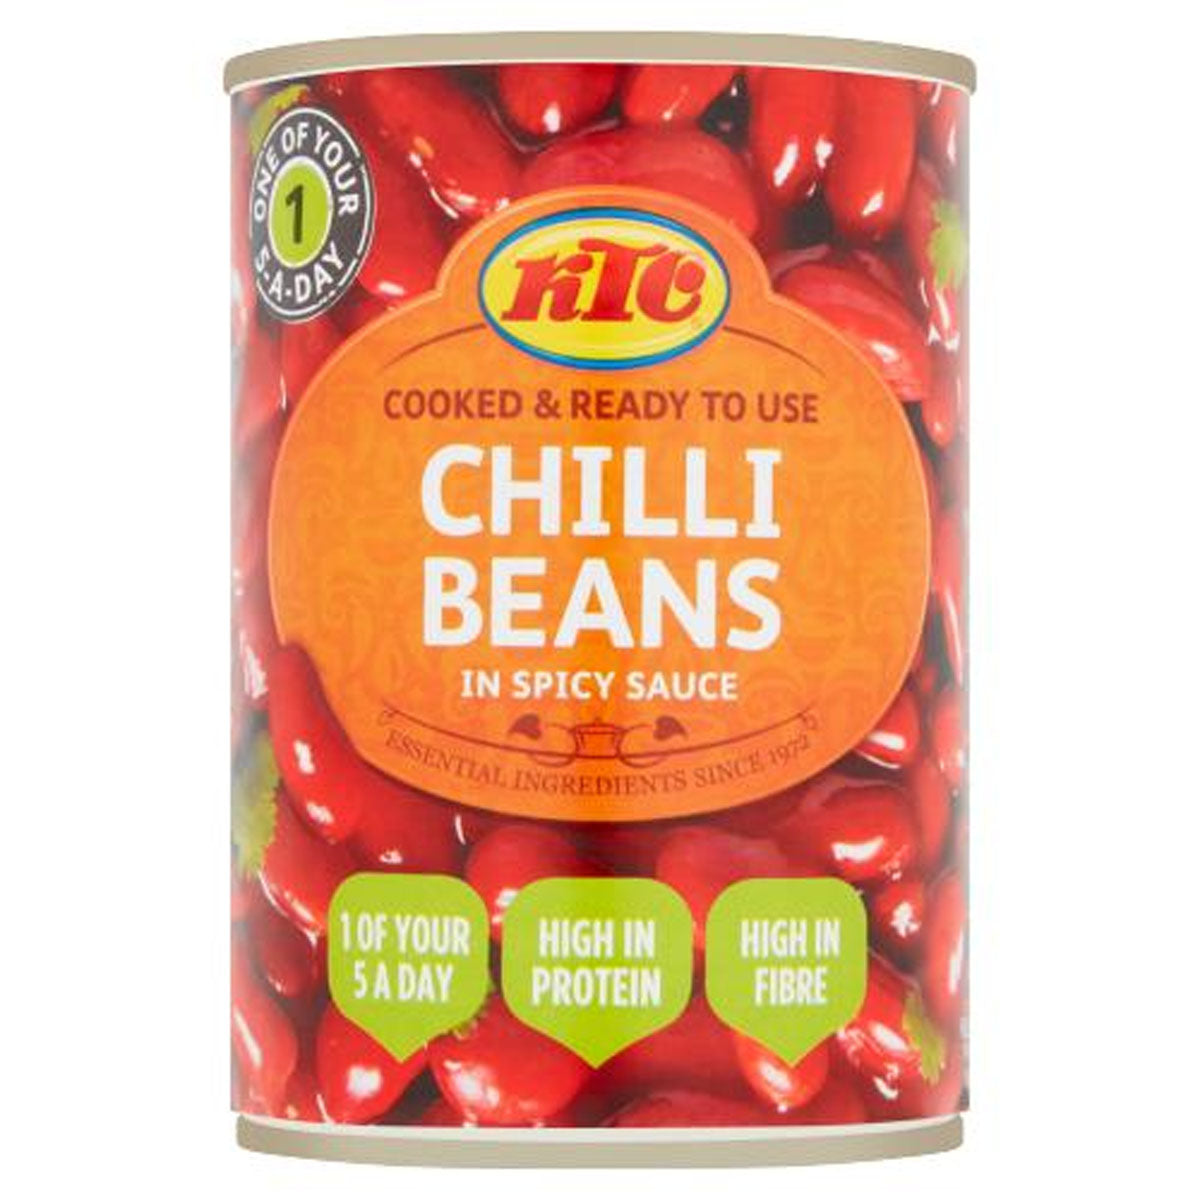 KTC - Chilli Beans in Spicy Sauce - 400g - Continental Food Store